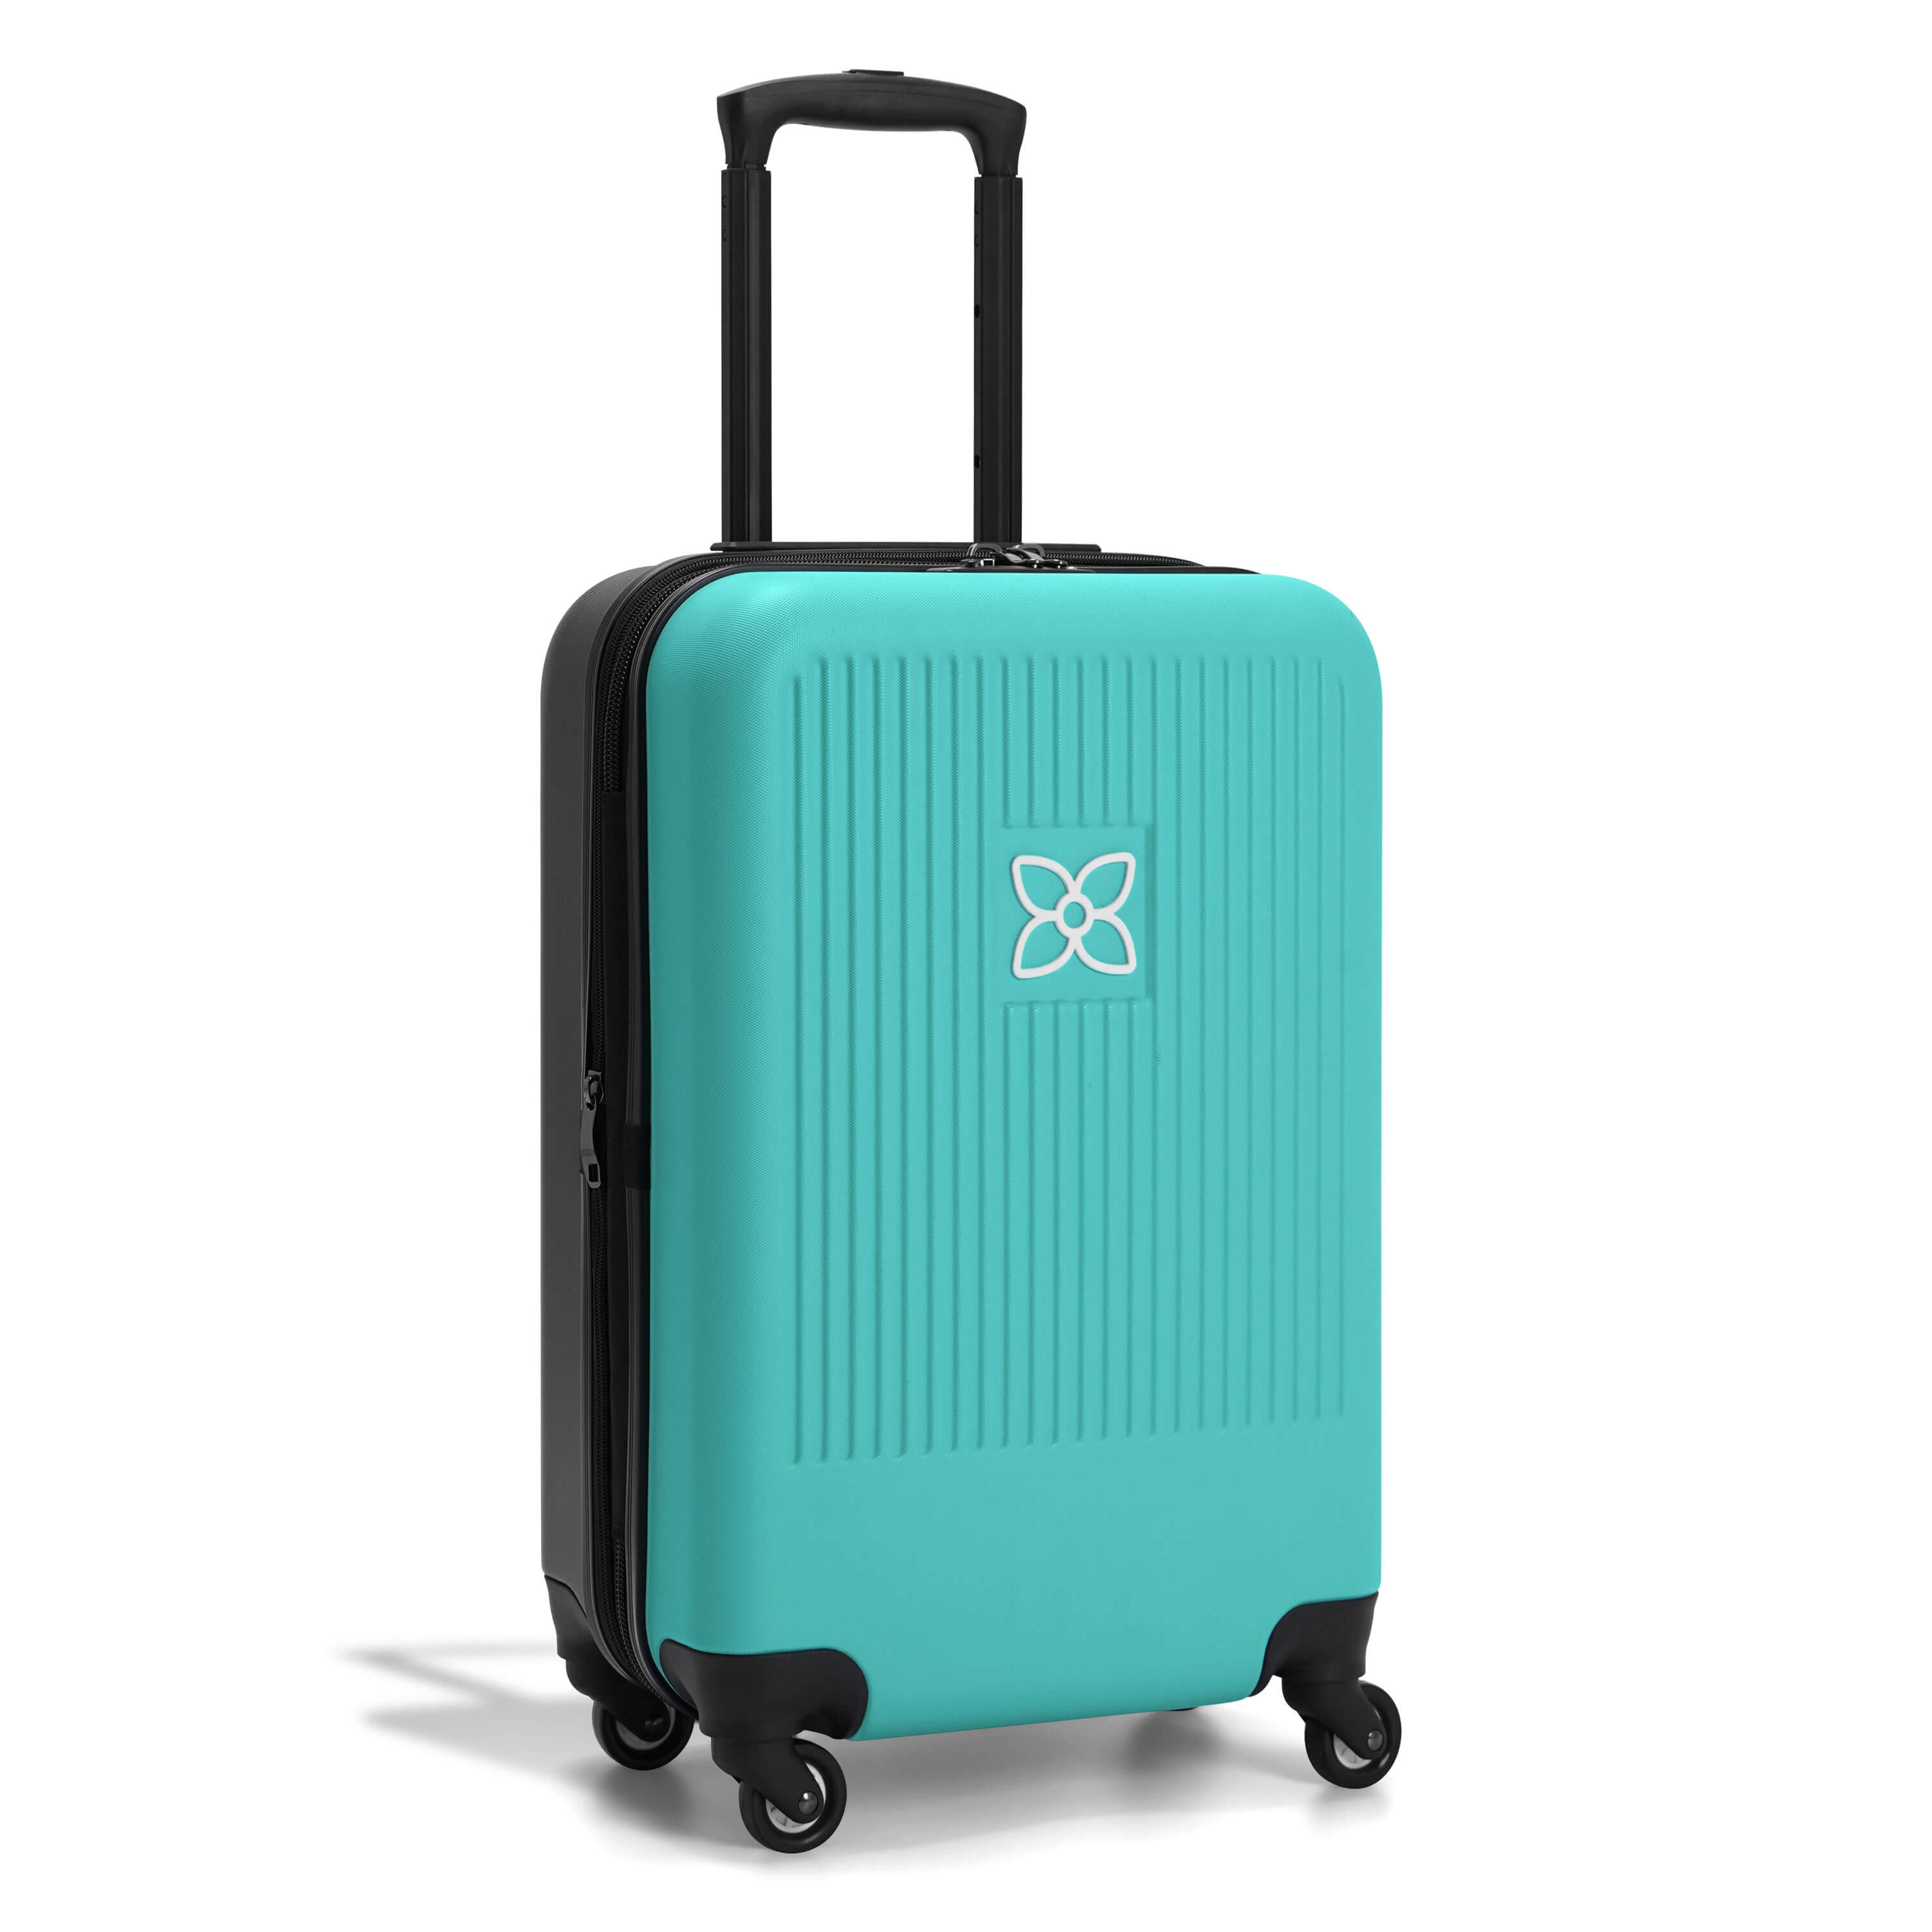 Angled front view of Sherpani hard-shell carry-on luggage, the Meridian in Caribe. Meridian features include a retractable luggage handle, uncrushable exterior, TSA-approved locking zippers and four 36-degree spinner wheels. The Caribe colorway is two-toned with the front of the suitcase in turquoise blue and the back in classic black. 